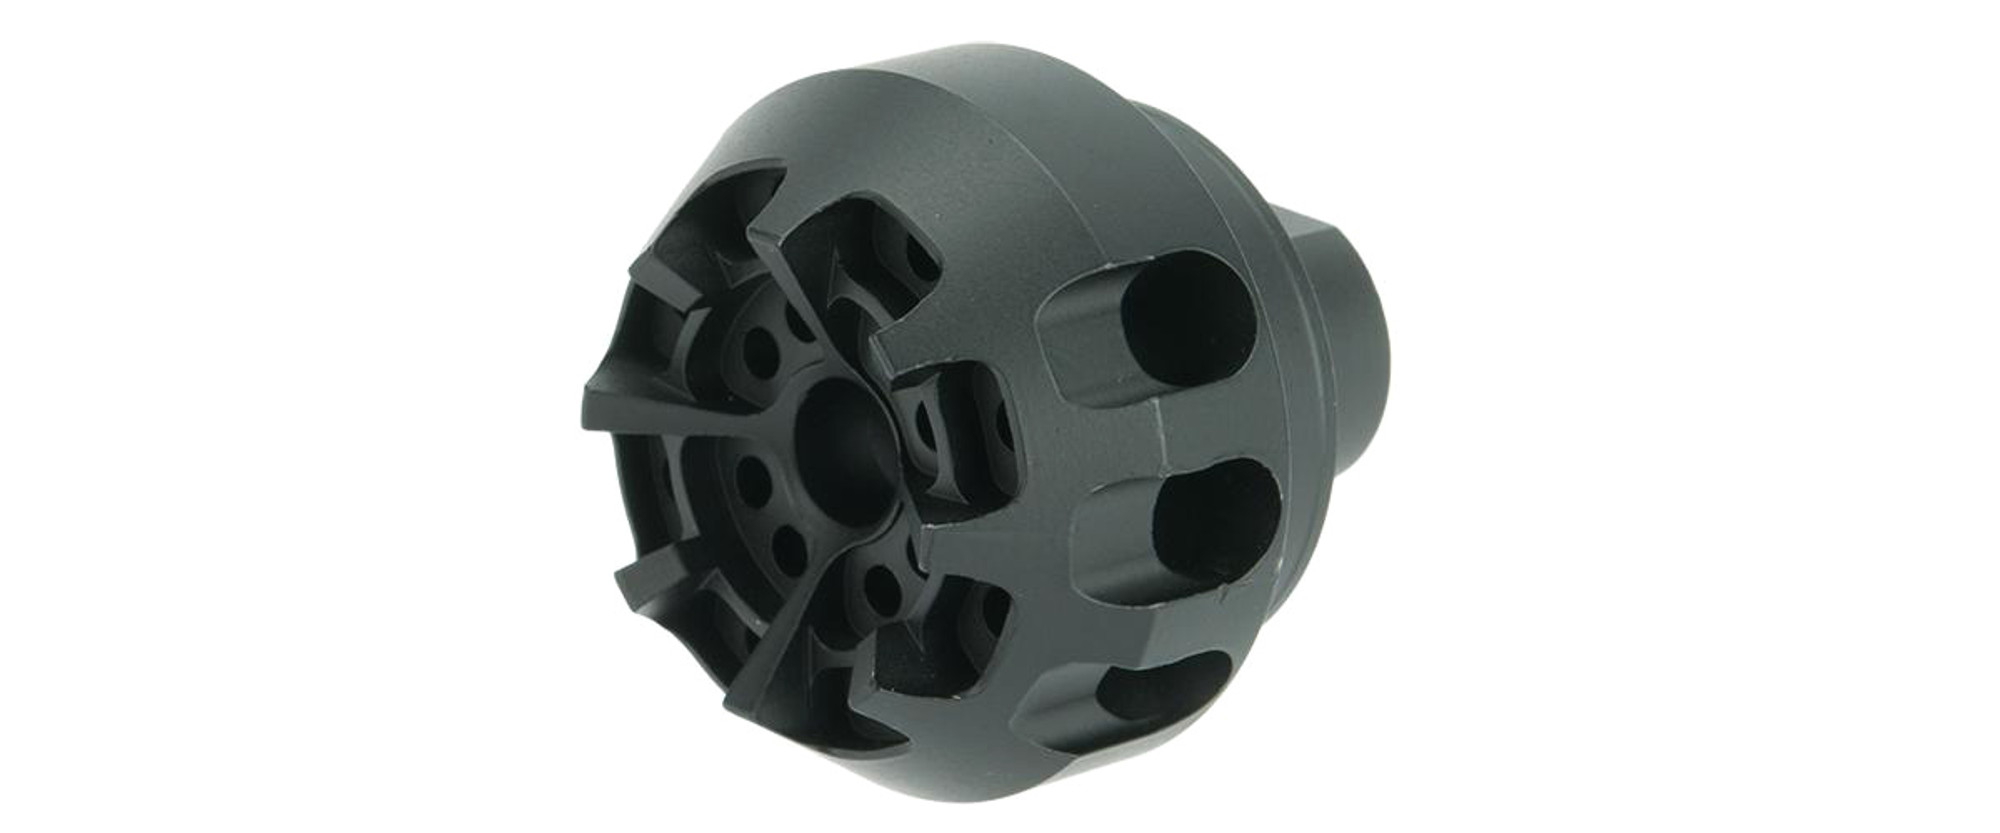 ARES AM-016 Metal Muzzle Break for Airsoft AEG Rifles - 14mm Positive